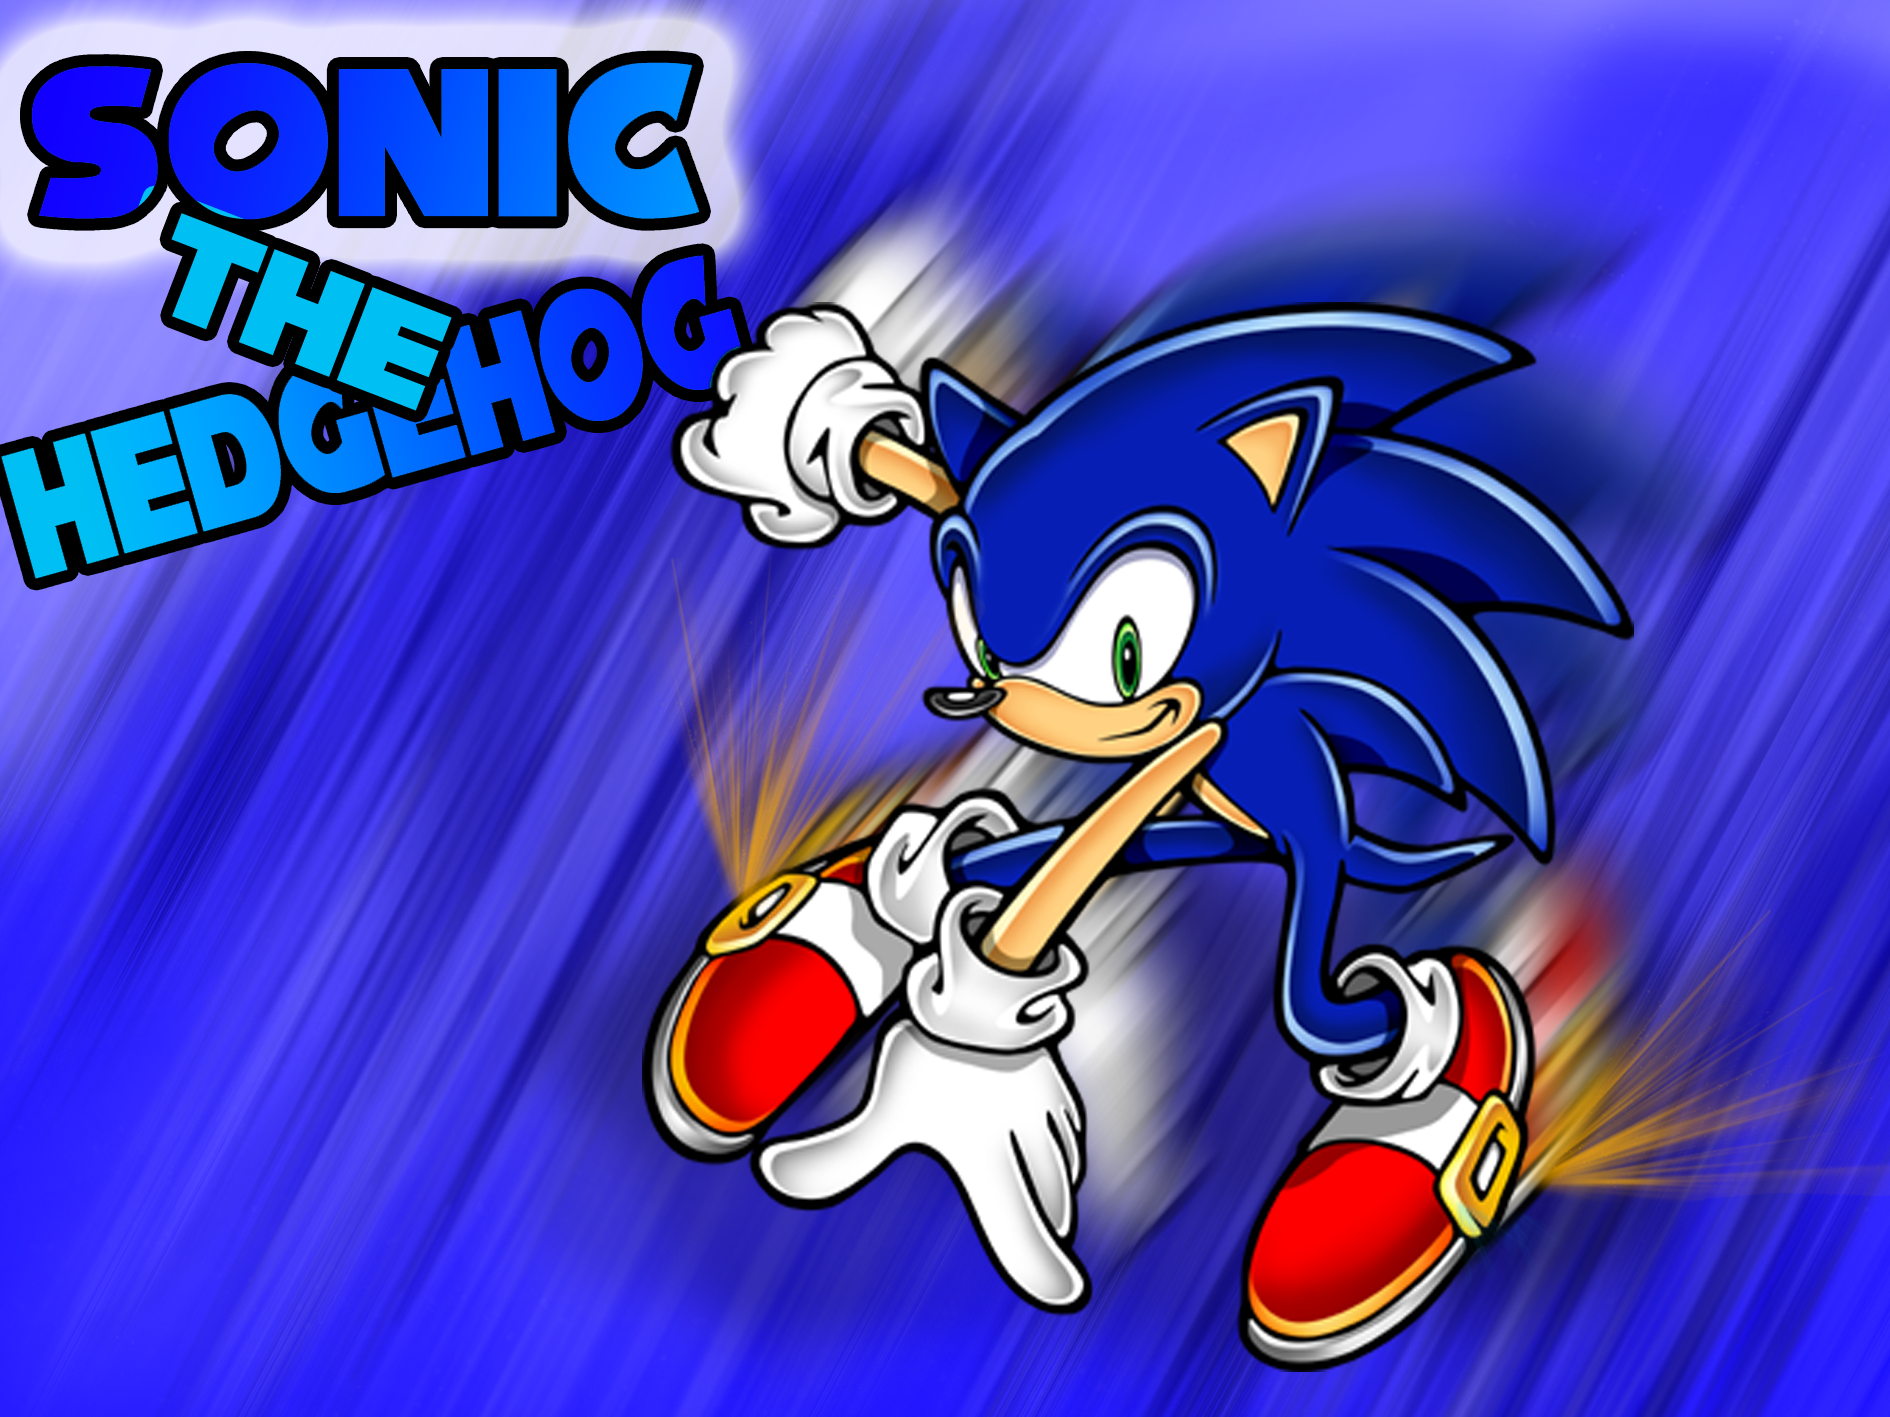  fs48f2009202e7Sonic the Hedgehog Wallpaper by ShadowStyle97png